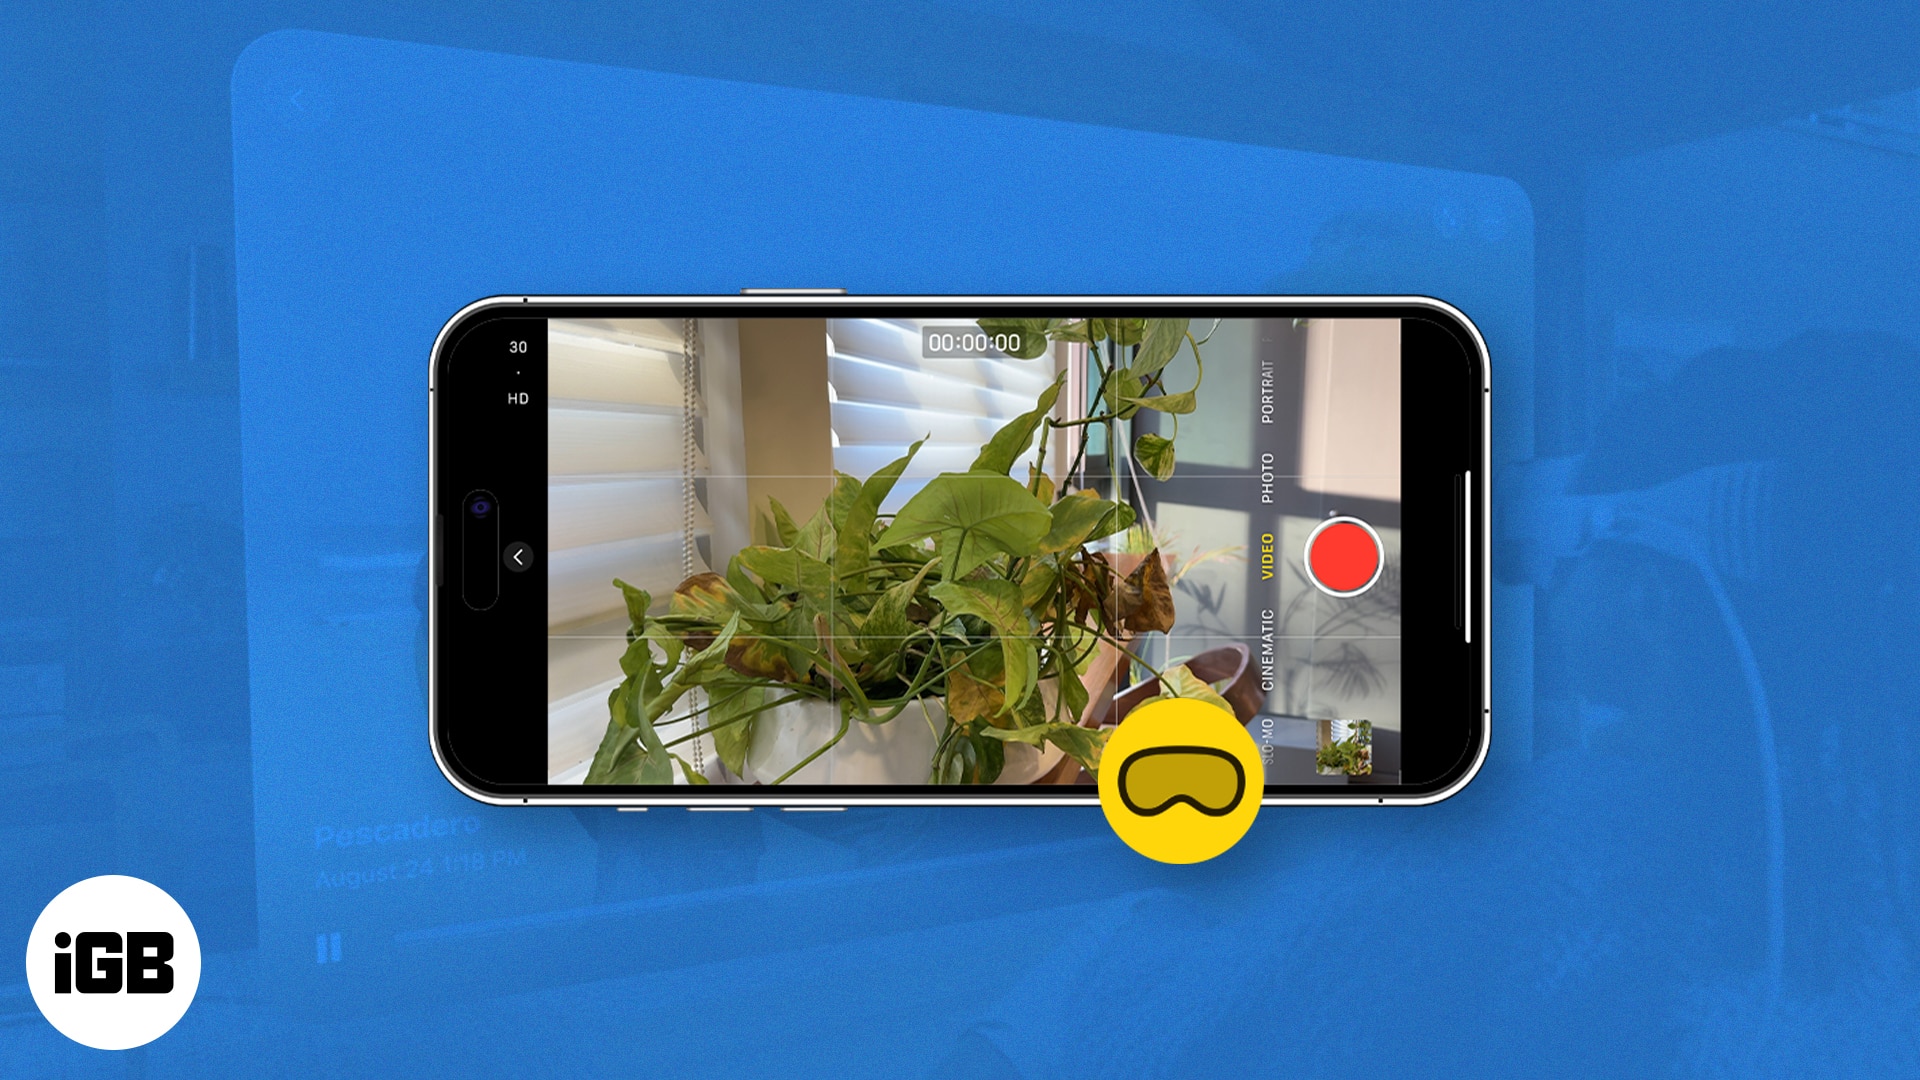 How to record spatial video for apple vision pro on iphone